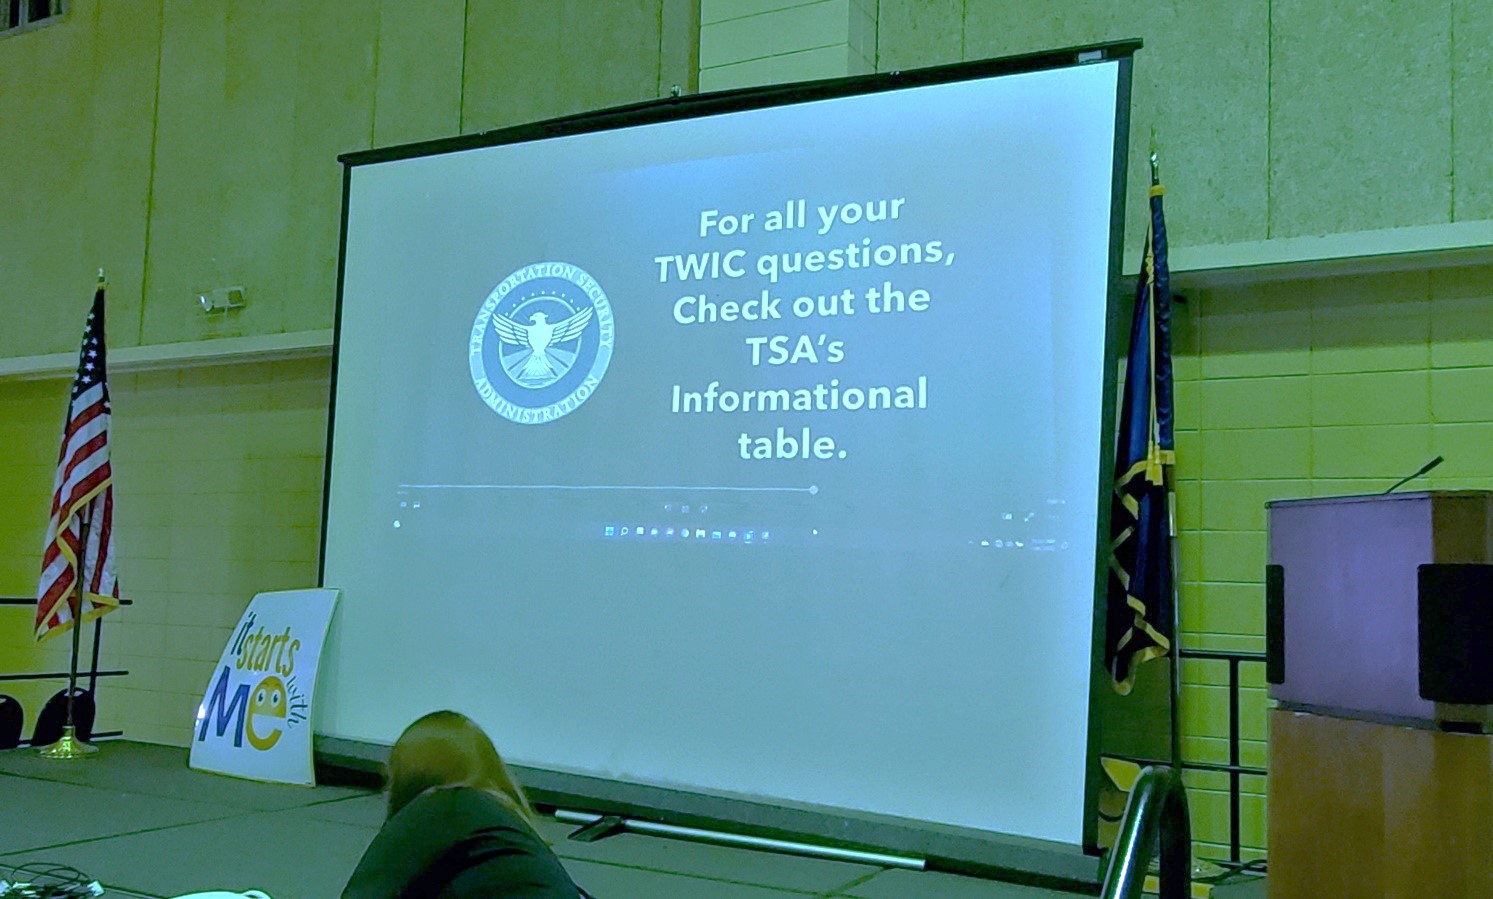 TSA was included on the video of available resources, welcoming guests to the job fair. (Photo courtesy of TSA ESVP)